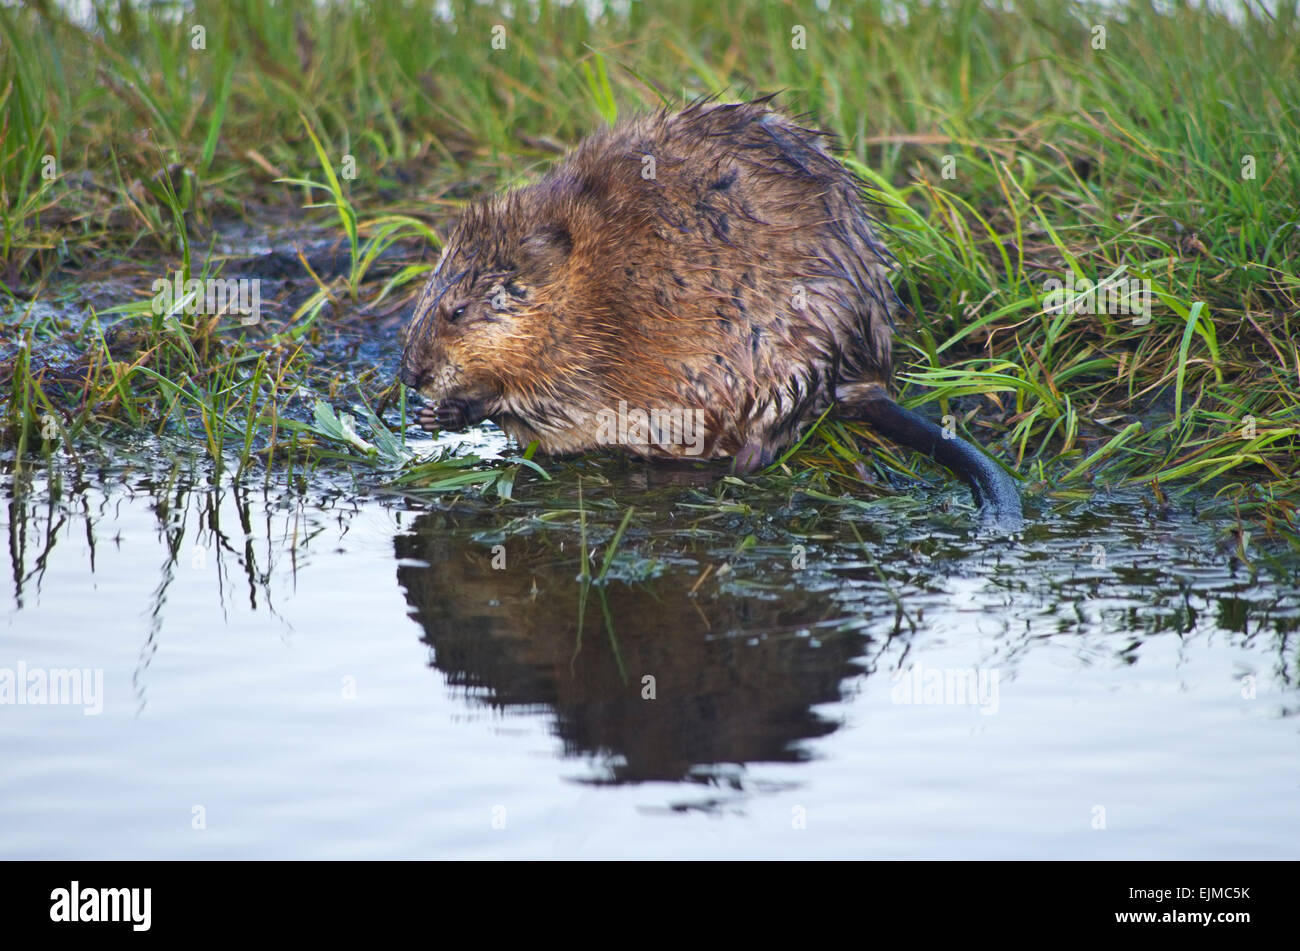 Muskrat sitting on shore by the water eating, Yellowstone National Park, Wyoming, United States. Stock Photo